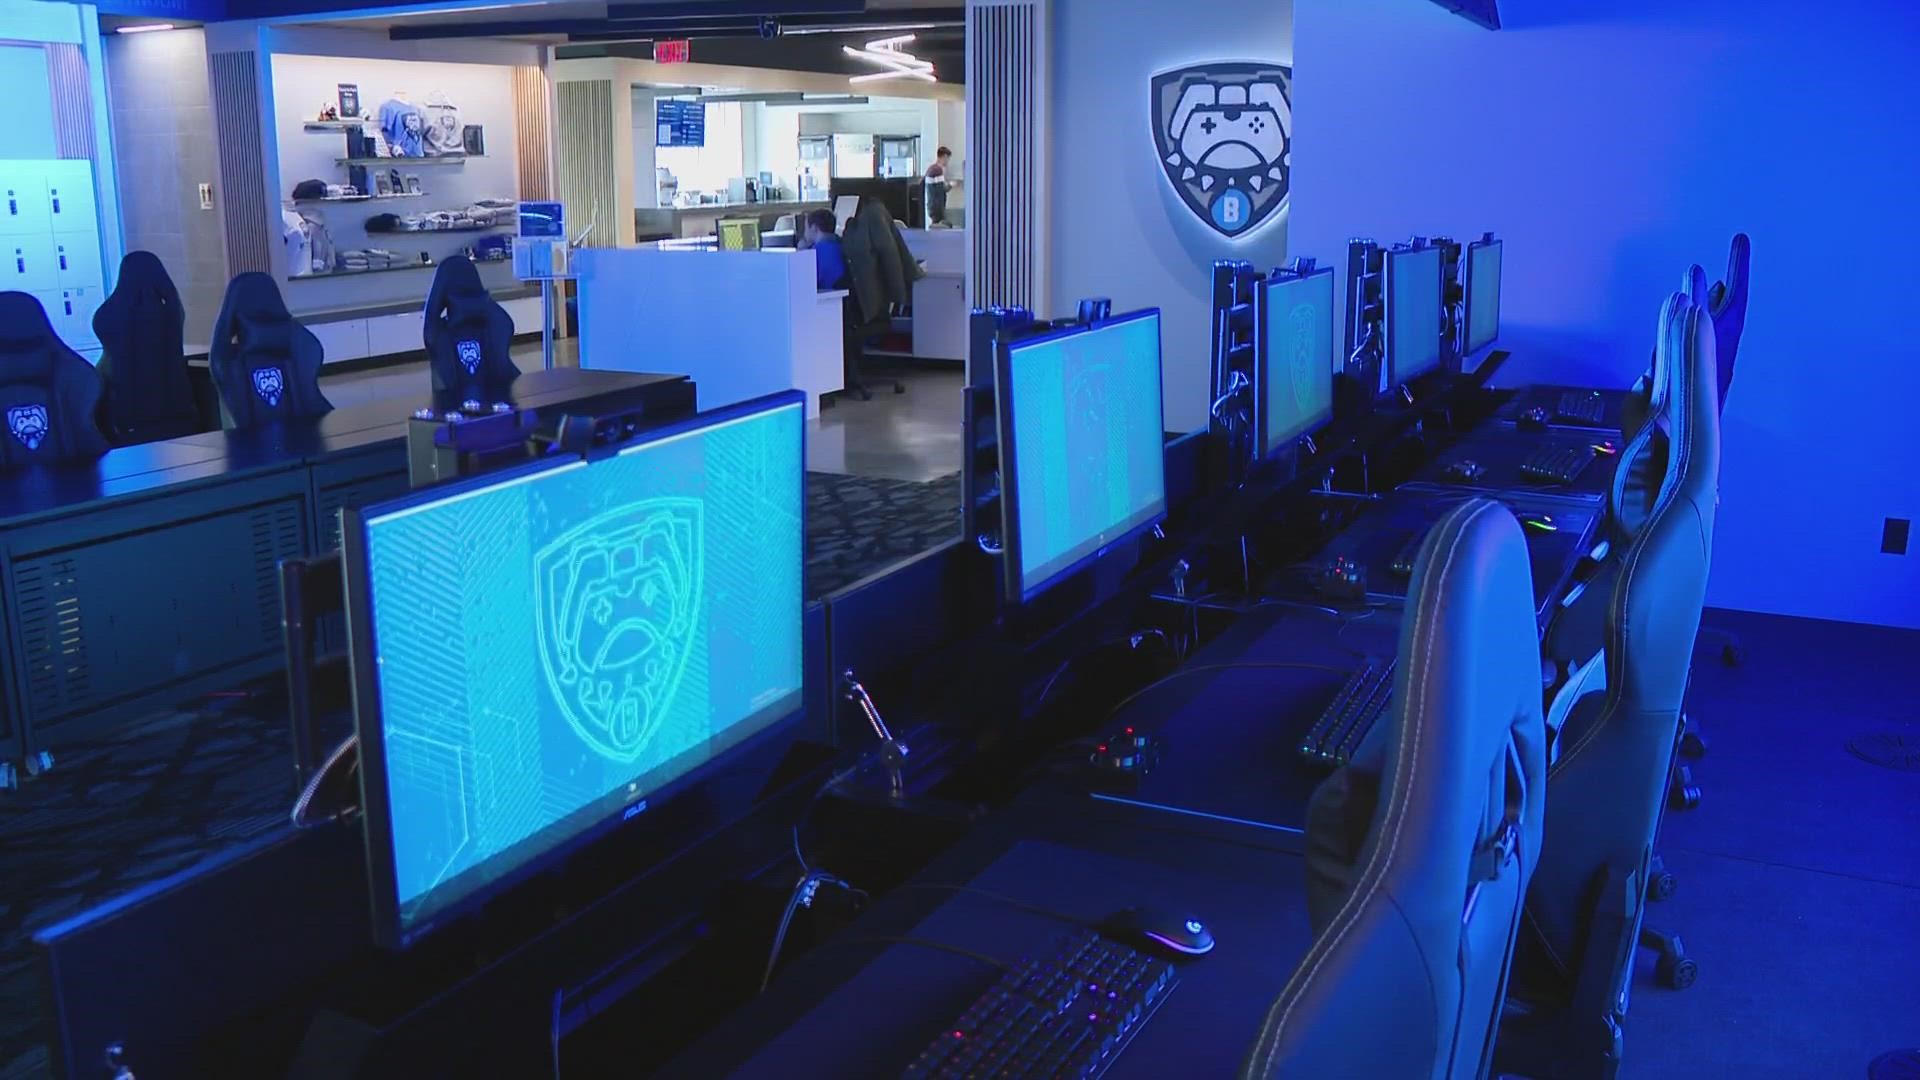 The university's esports park officially opened last year.